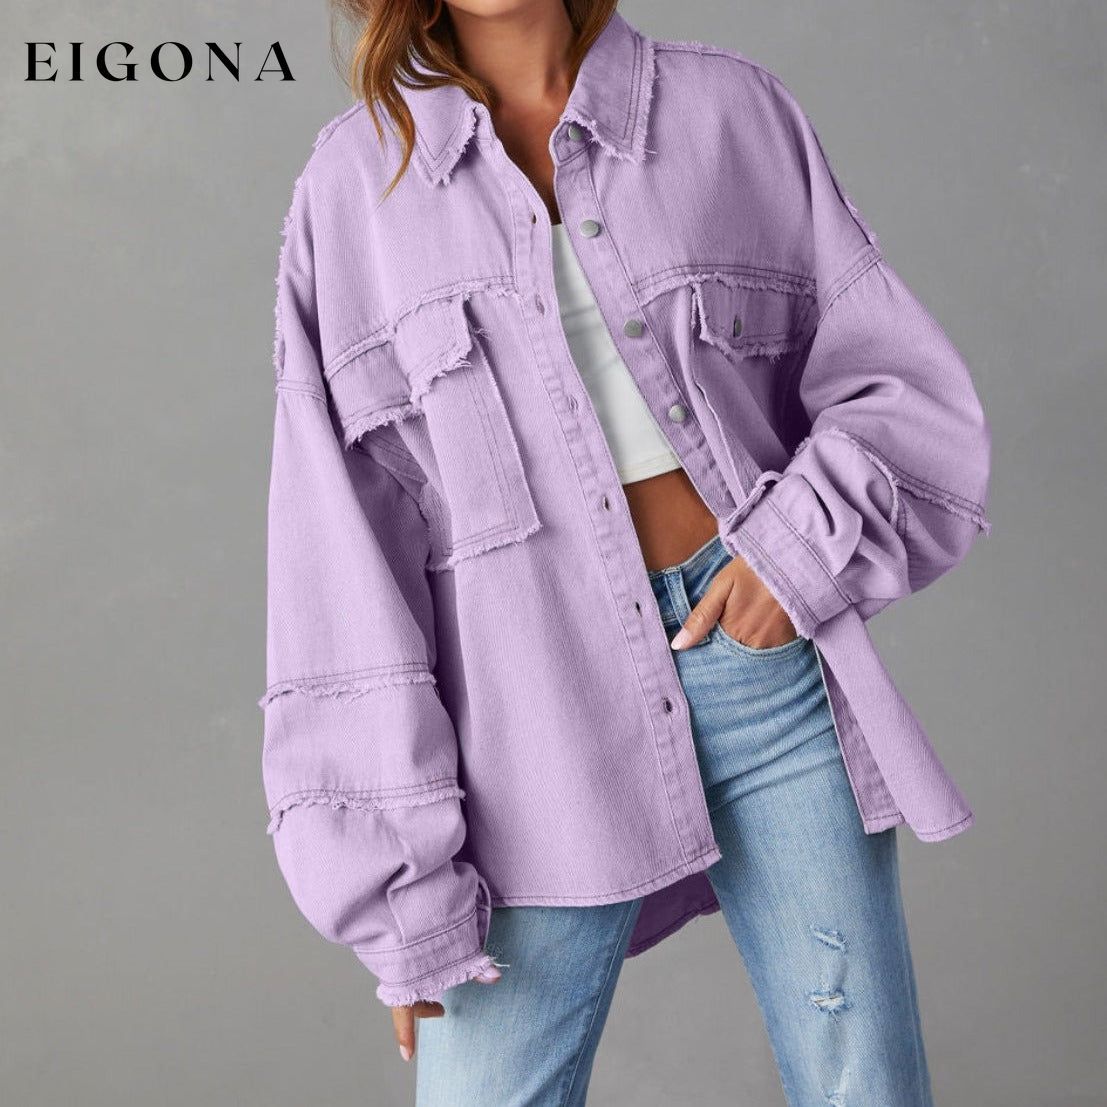 Dropped Shoulder Raw Hem Jacket Lilac clothes Denim Jacket Jacket long sleeve top Outerwear Ship From Overseas Shipping Delay 09/29/2023 - 10/02/2023 X@Y@K